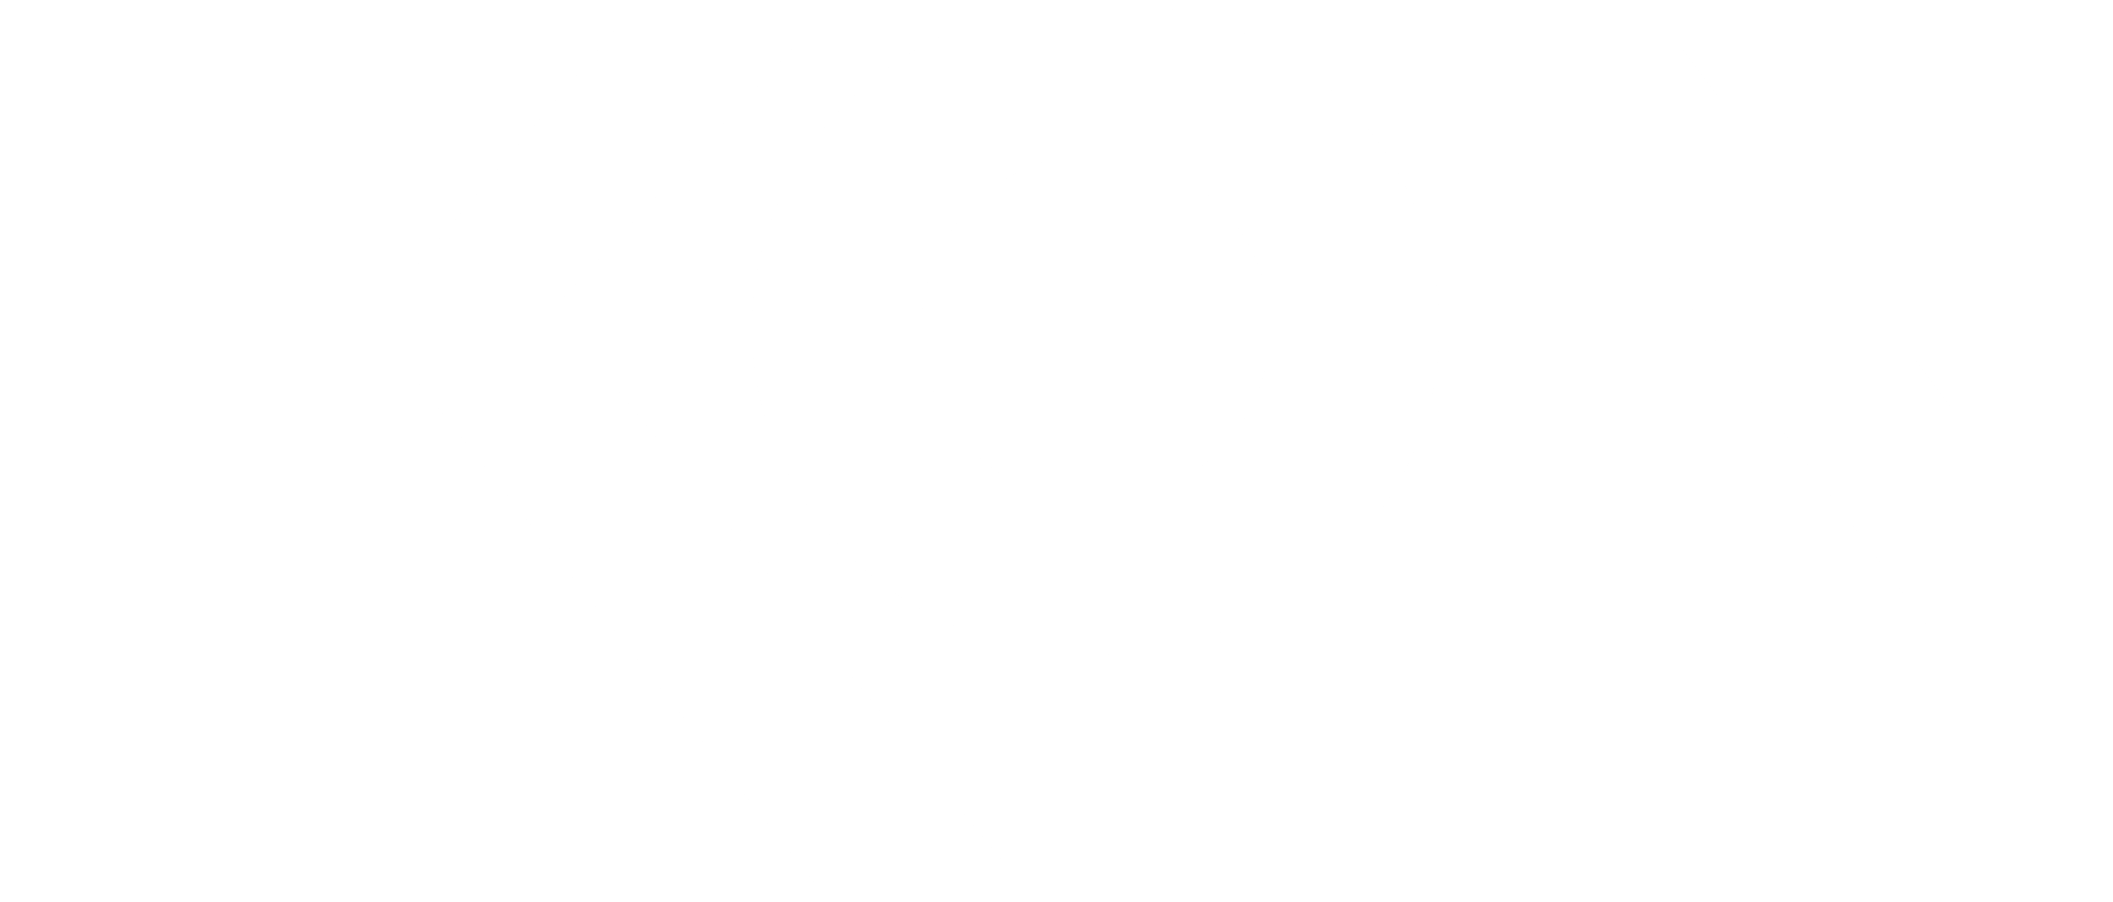 Download Ikon Logo Black And White Png Image With No Background Pngkey Com